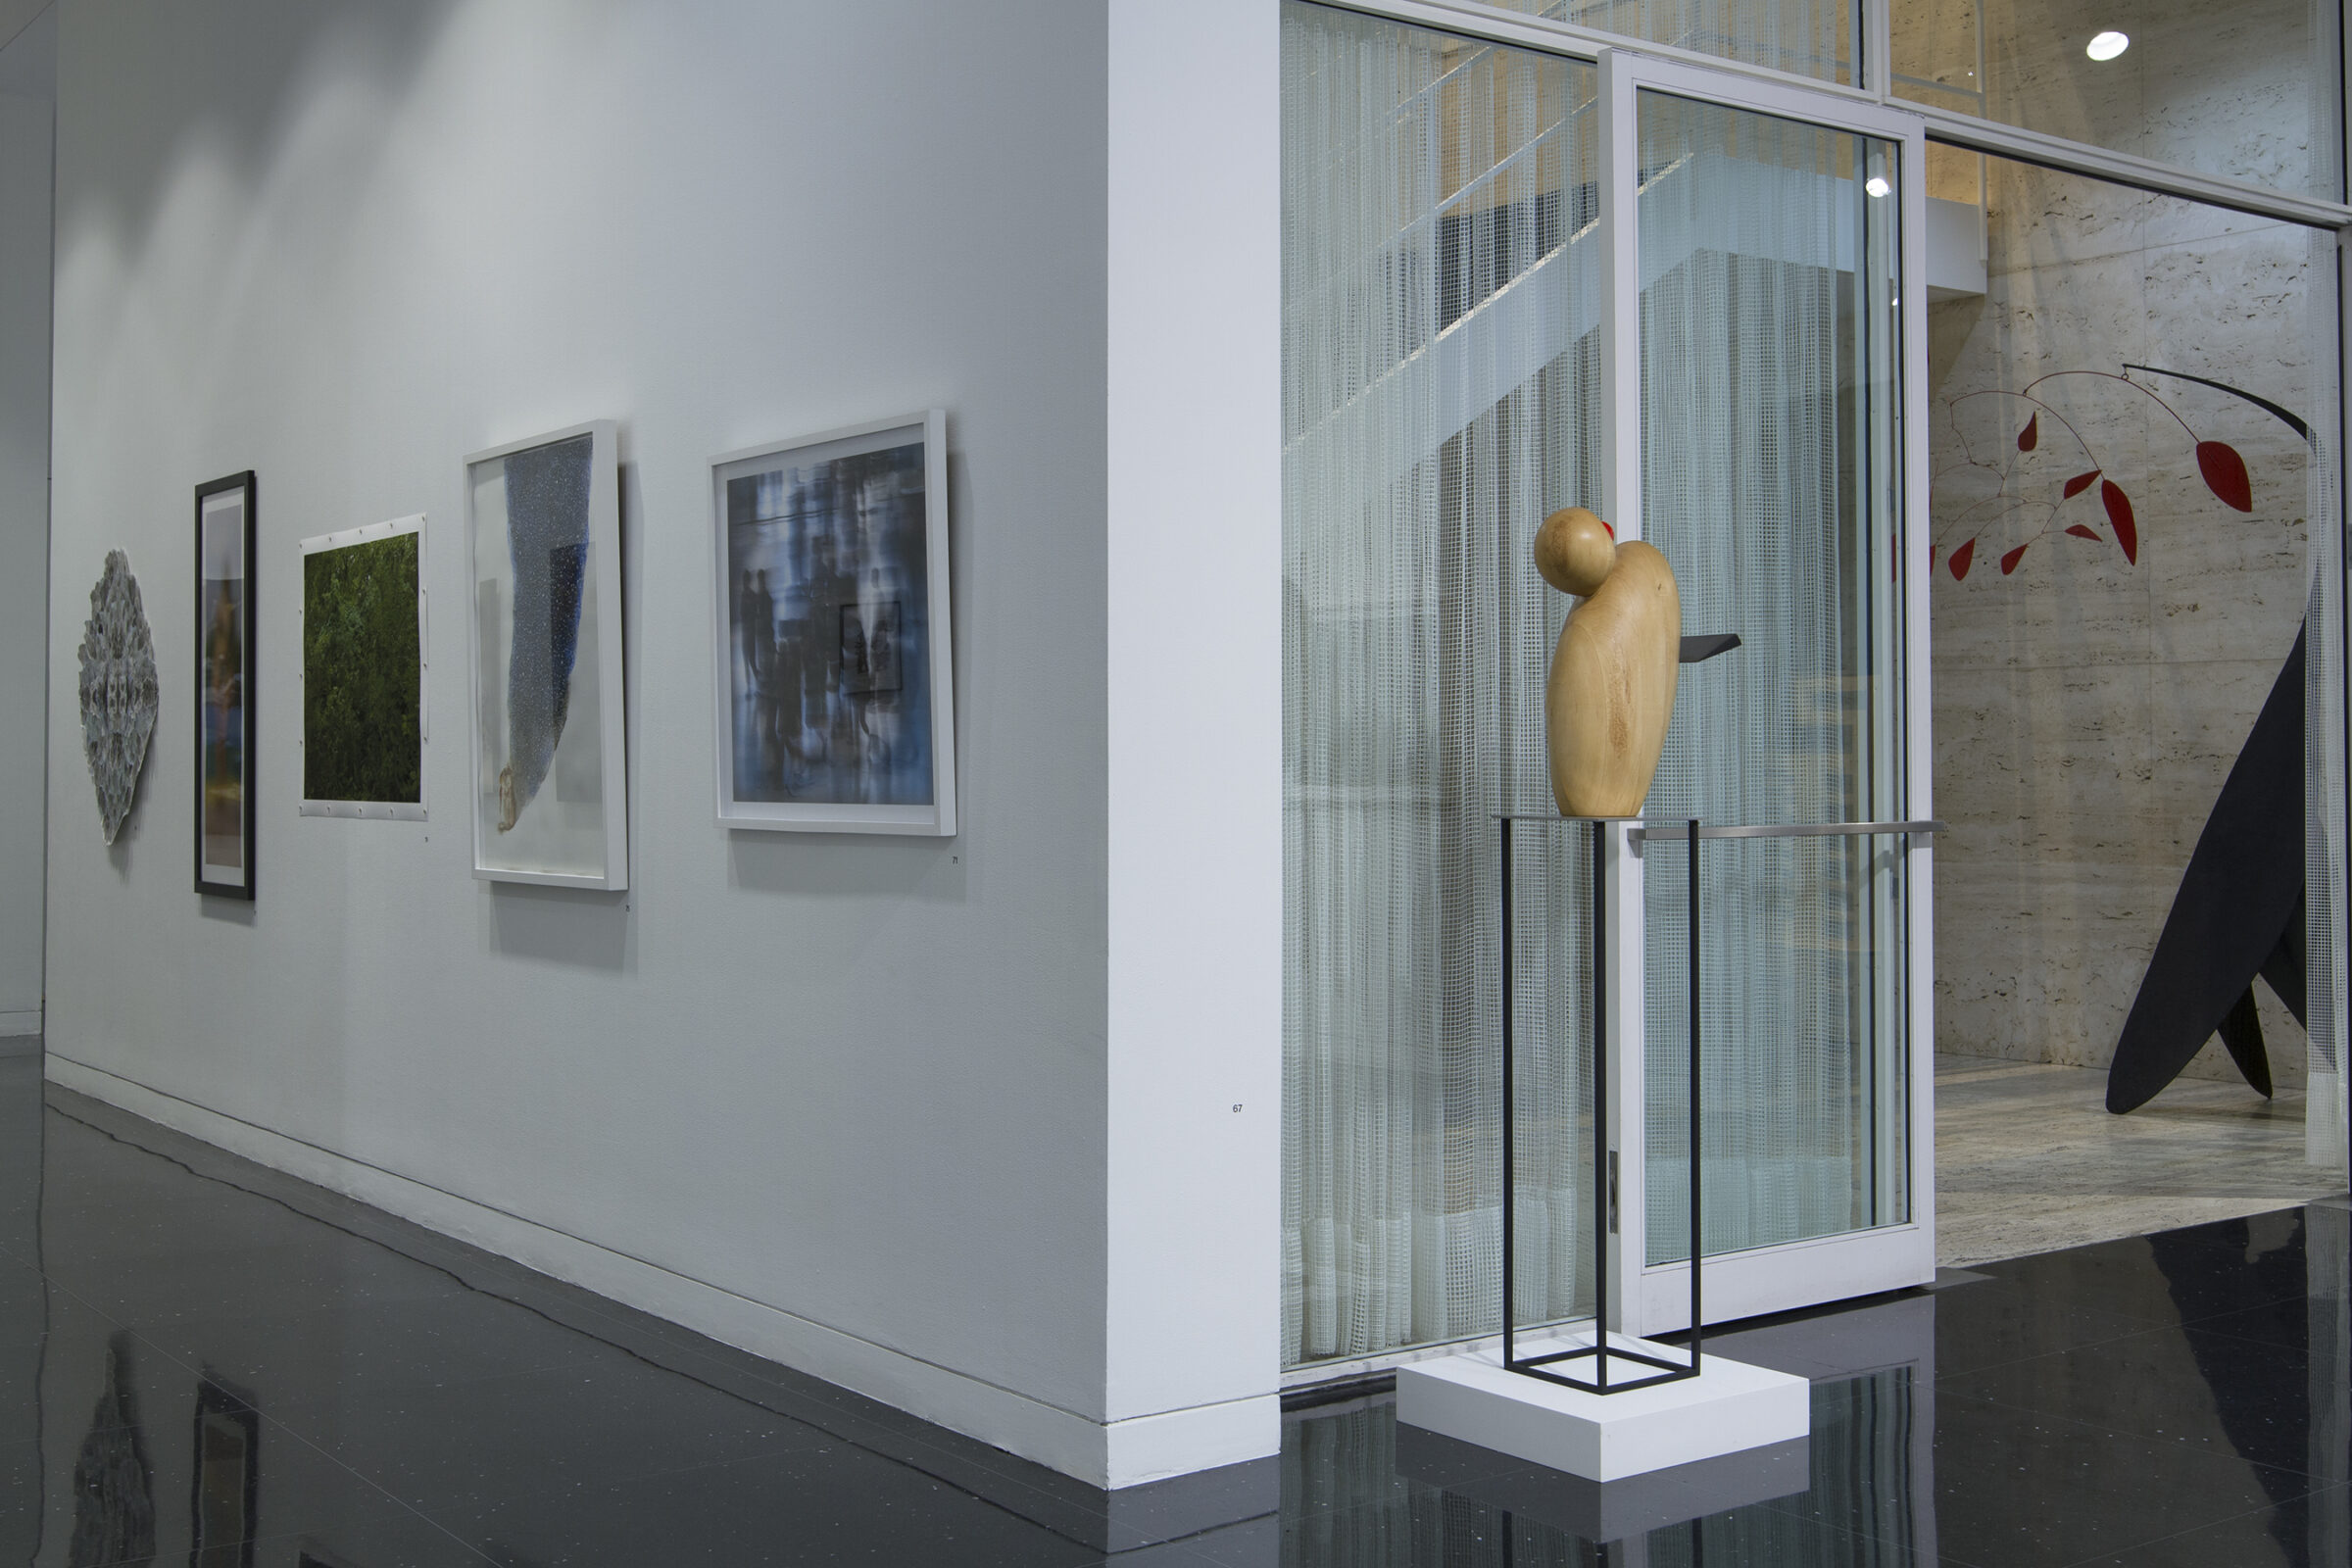 In a white gallery, a wooden sculpture of a duck or birdlike creature stands on a black wire pedestal in front of the Mies van der Rohe stairwell. To the left of the sculpture and around the corner, five artworks are arranged in a horizontal line down a hallway.